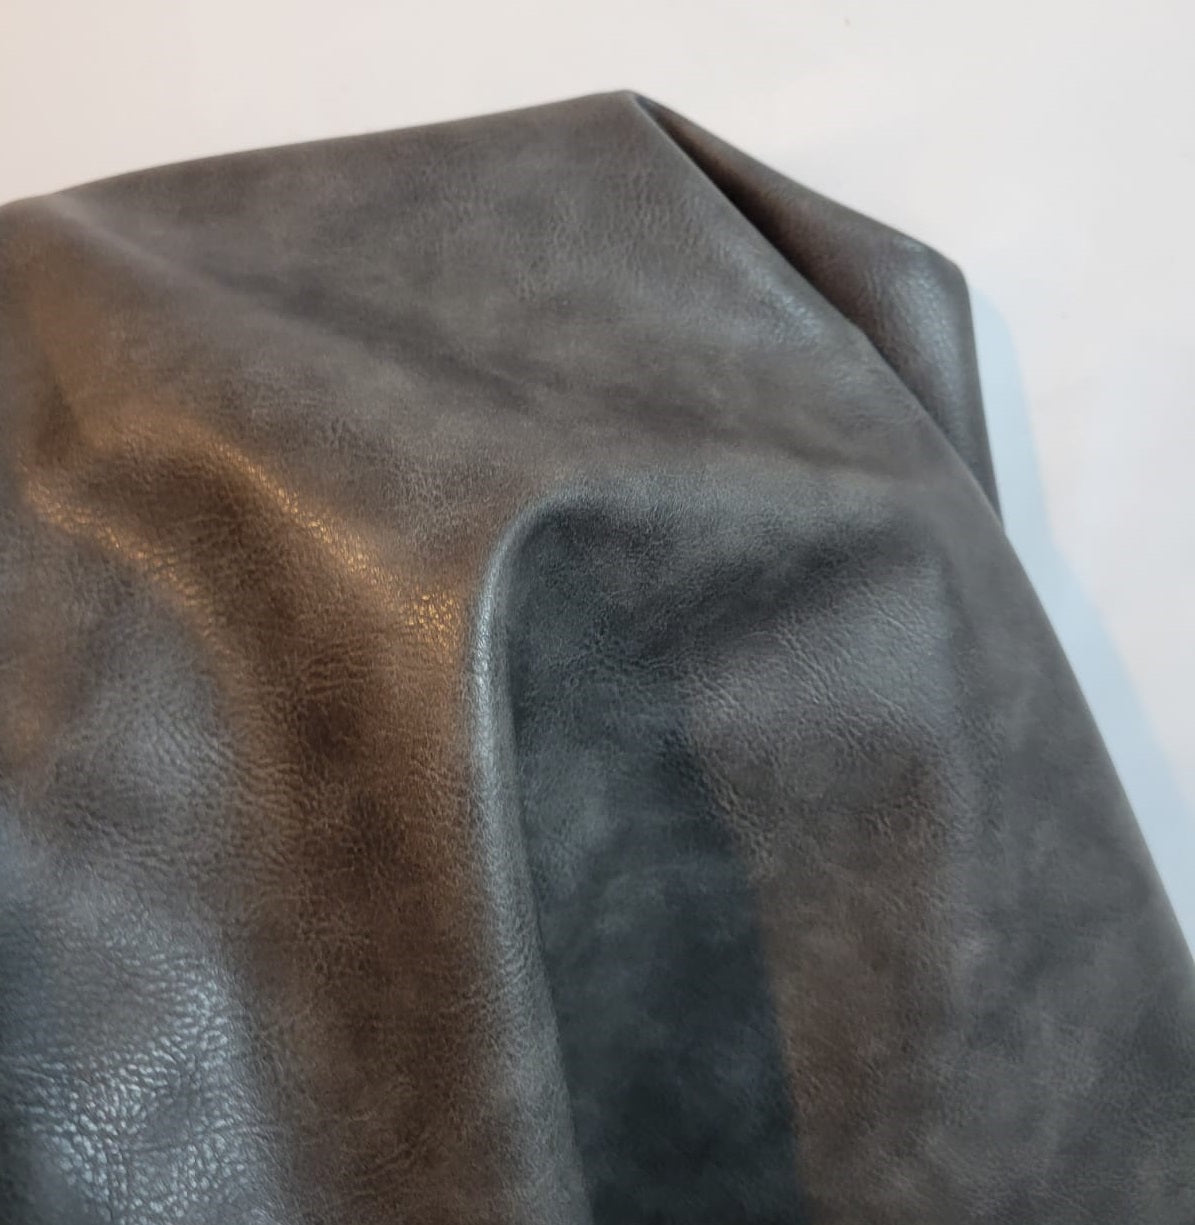  Faux vegan leather by the yard sheets distressed leather fabric for upholstery 30,000 Double Rubs vinyl sheets nappa leather crafts bookbinding books furniture fabrics uphilstery fuax material pu pleather faiux learher cruelty free nappa seat graphite gray antique